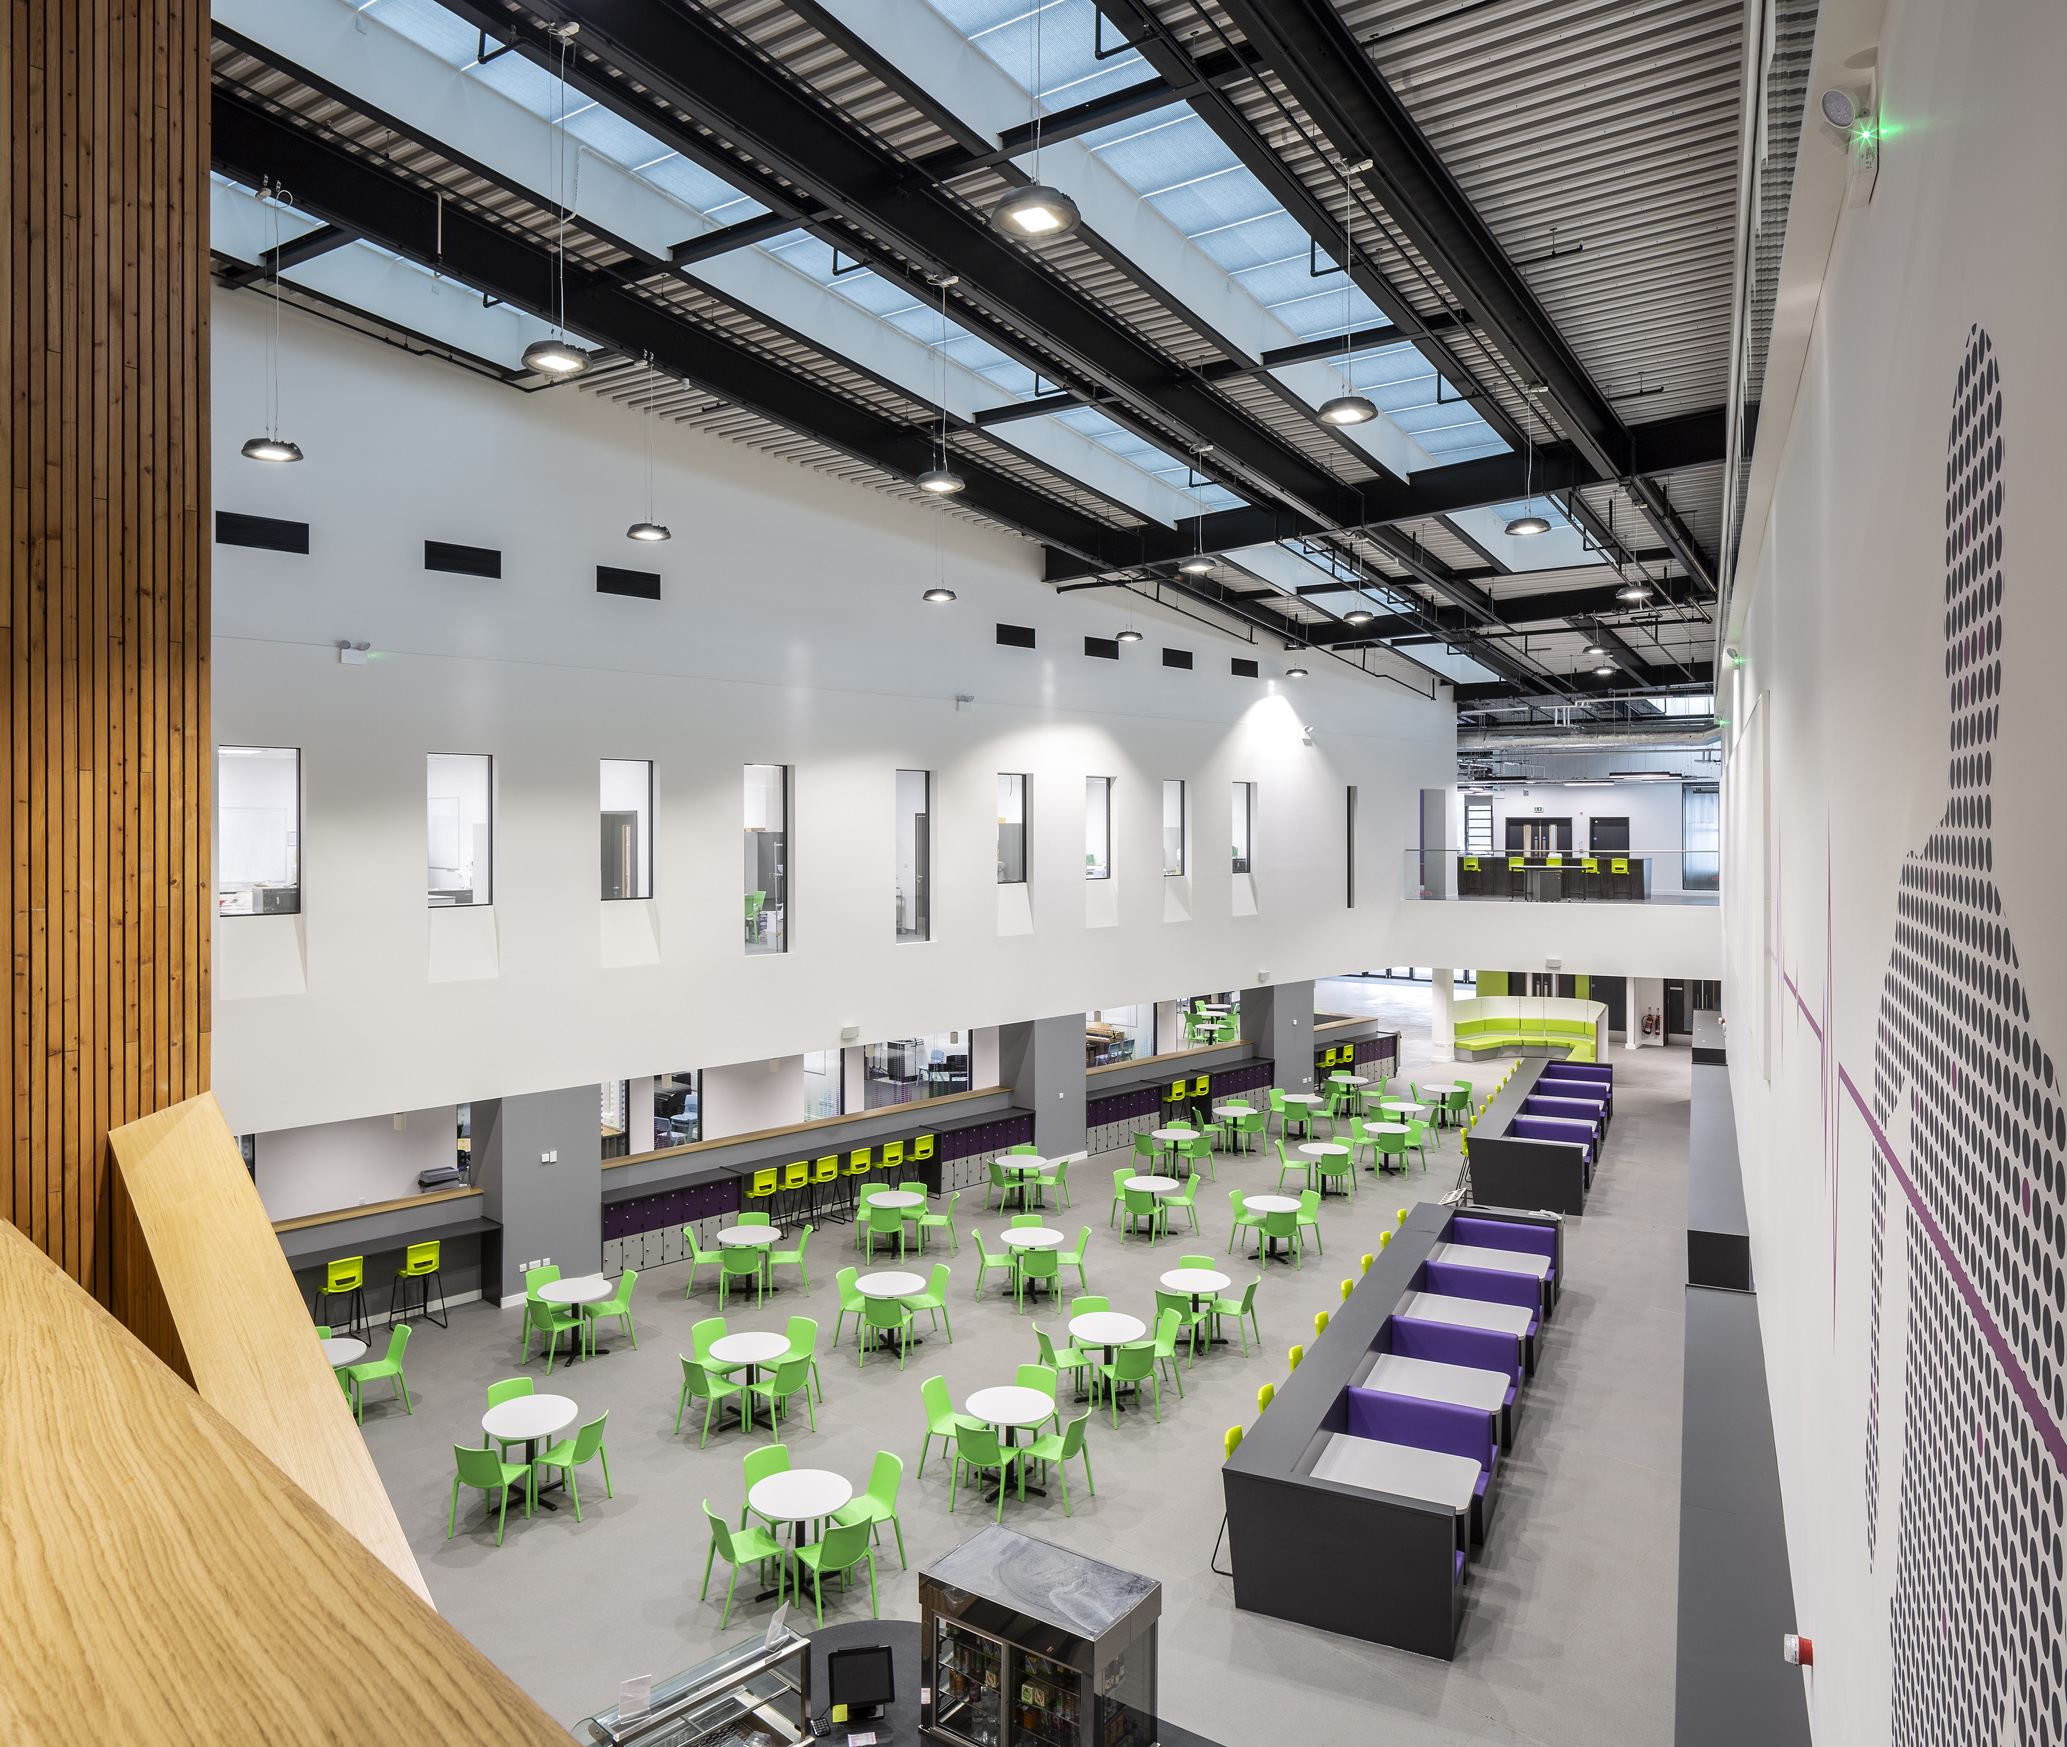 Deanestor completes £1.5m furniture and fit out at Bertha Park High School